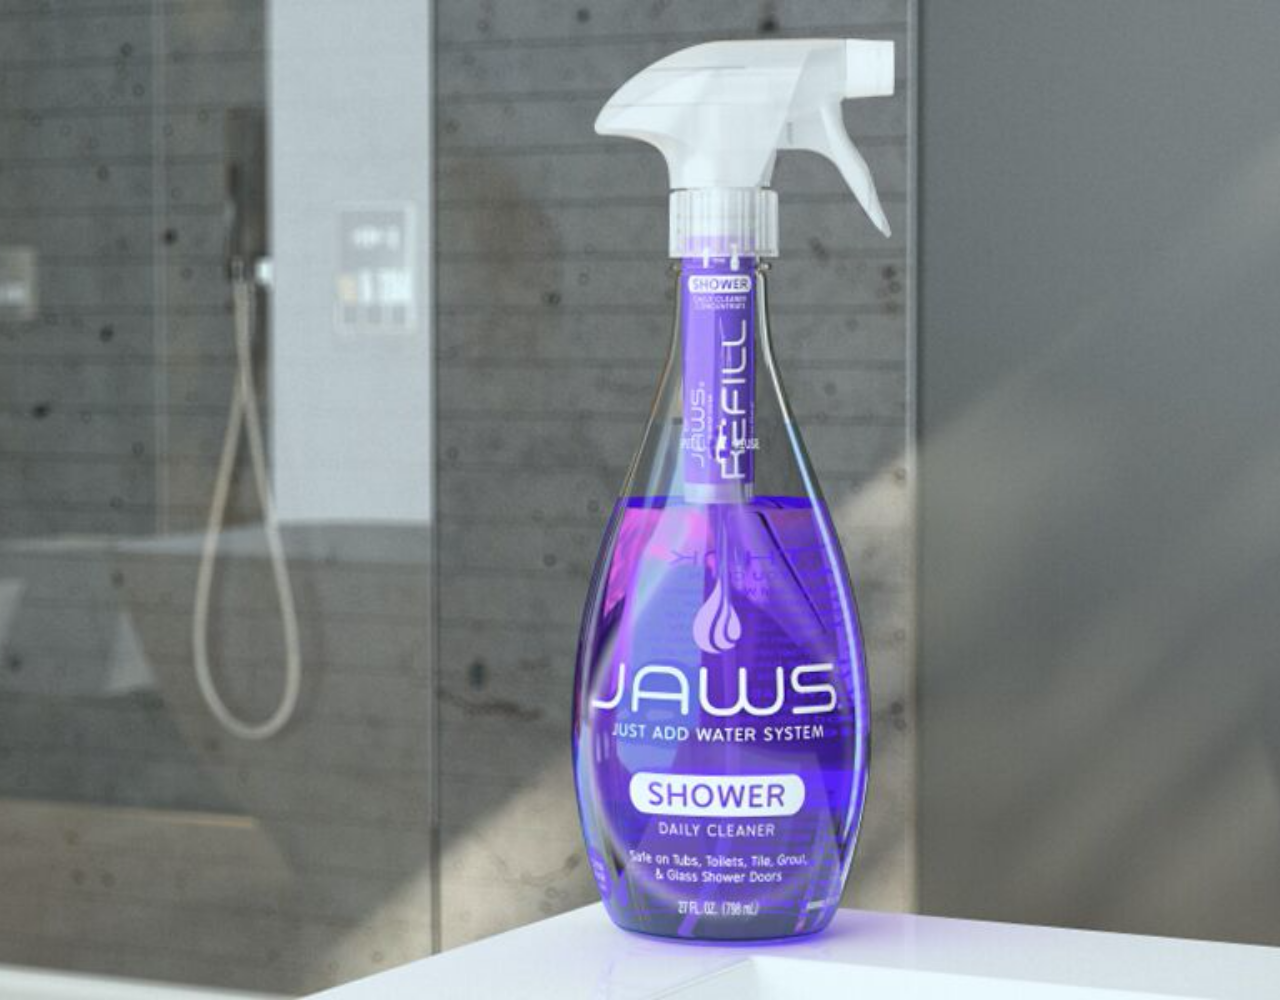 JAWS Shower Cleaner